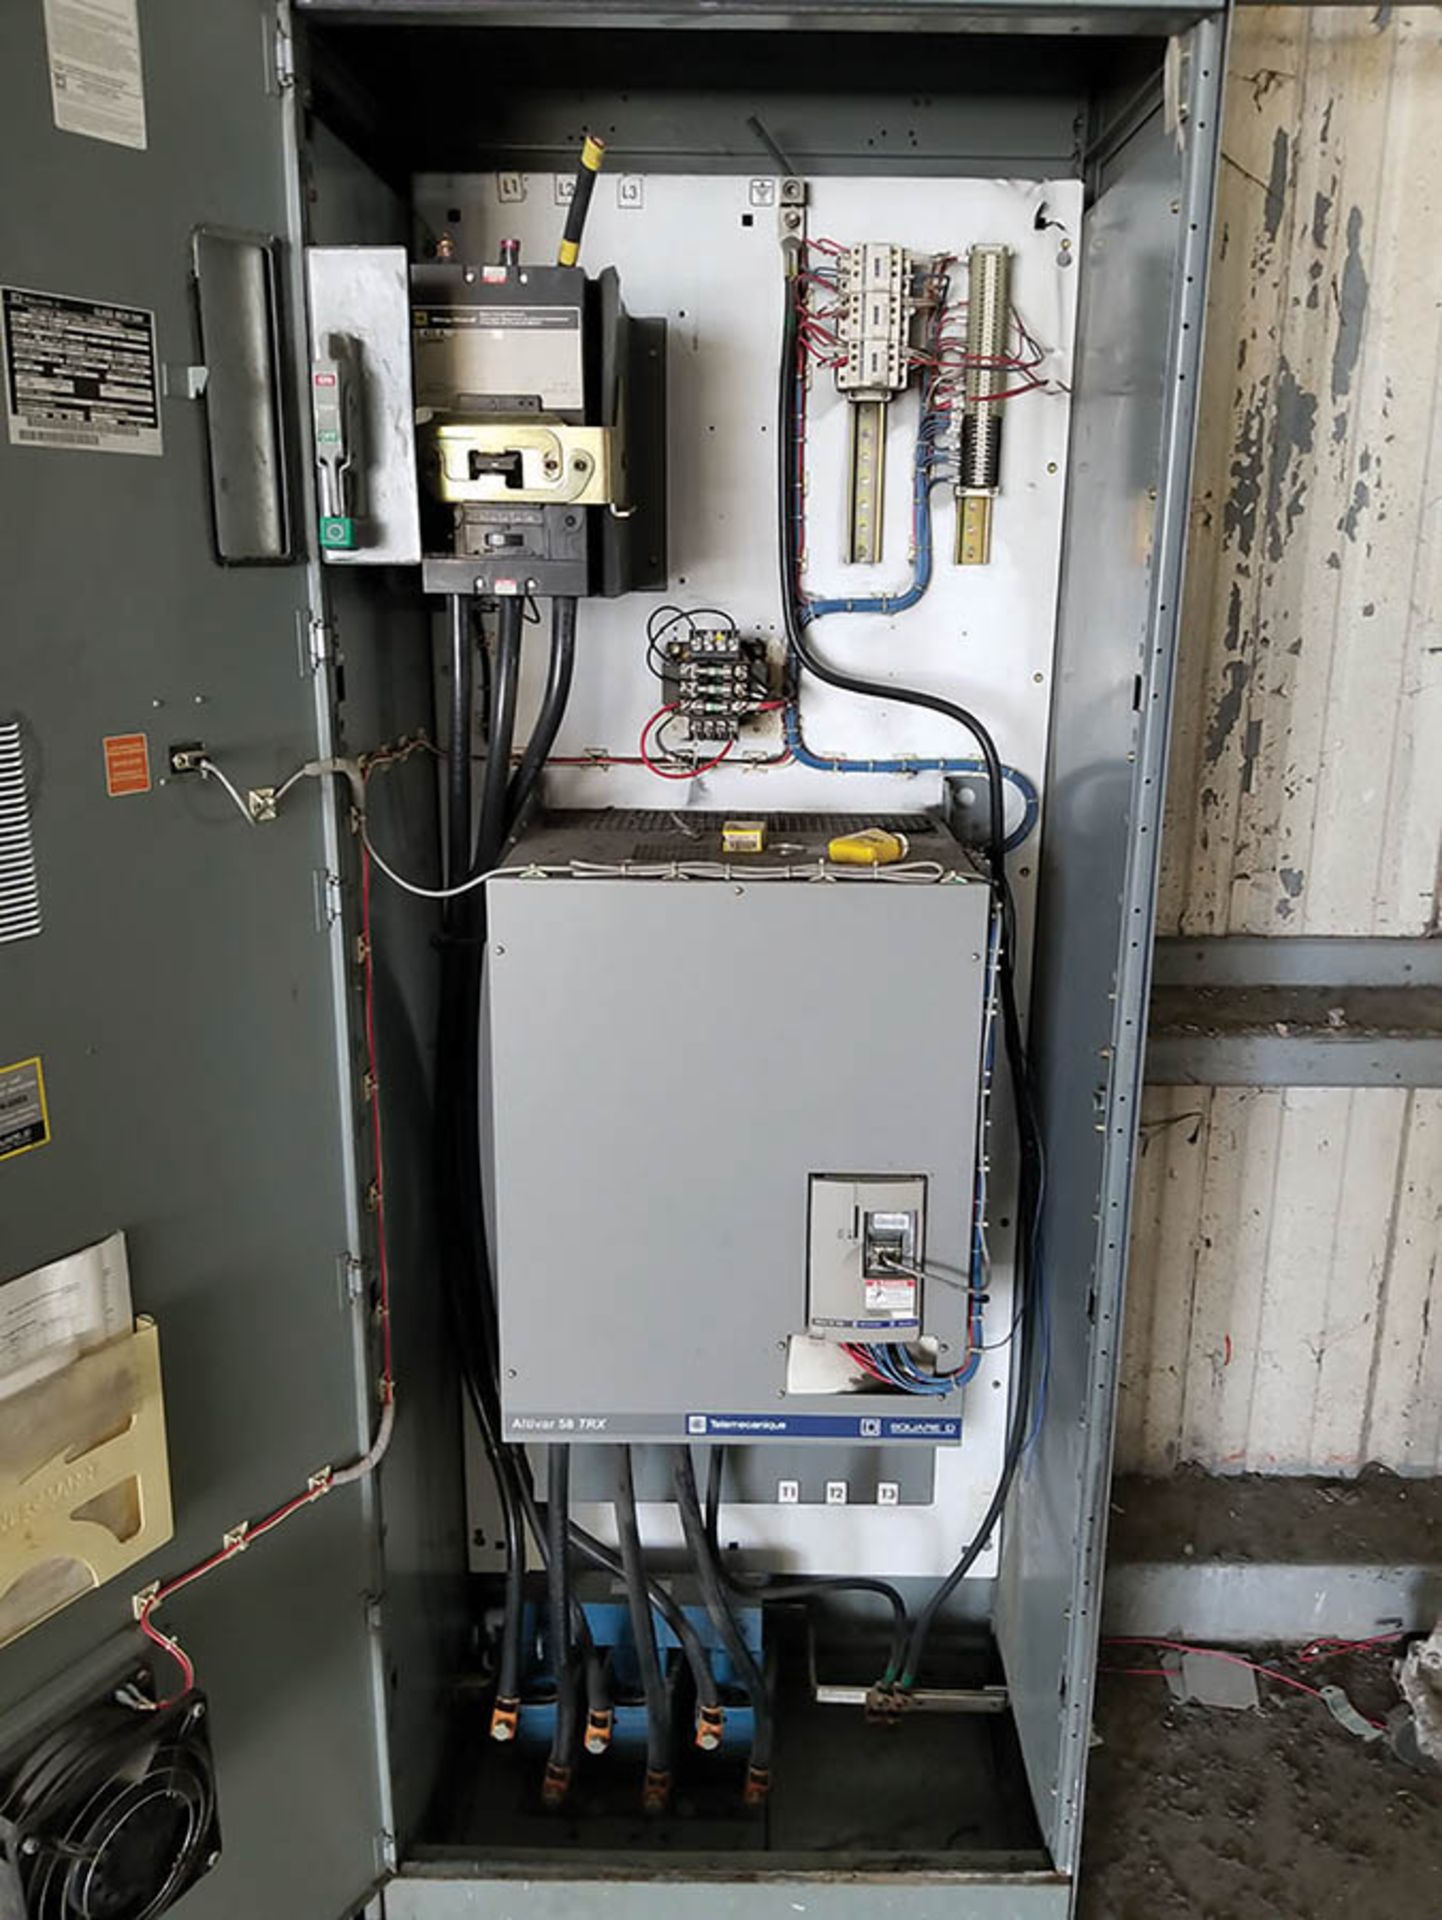 ALL ELECTRICAL CONTROL PANELS USED TO RUN OVERHEAD CONVEYORS, MCC'S, PLC'S, VOLTAGE STABILIZERS, PLC - Image 10 of 13